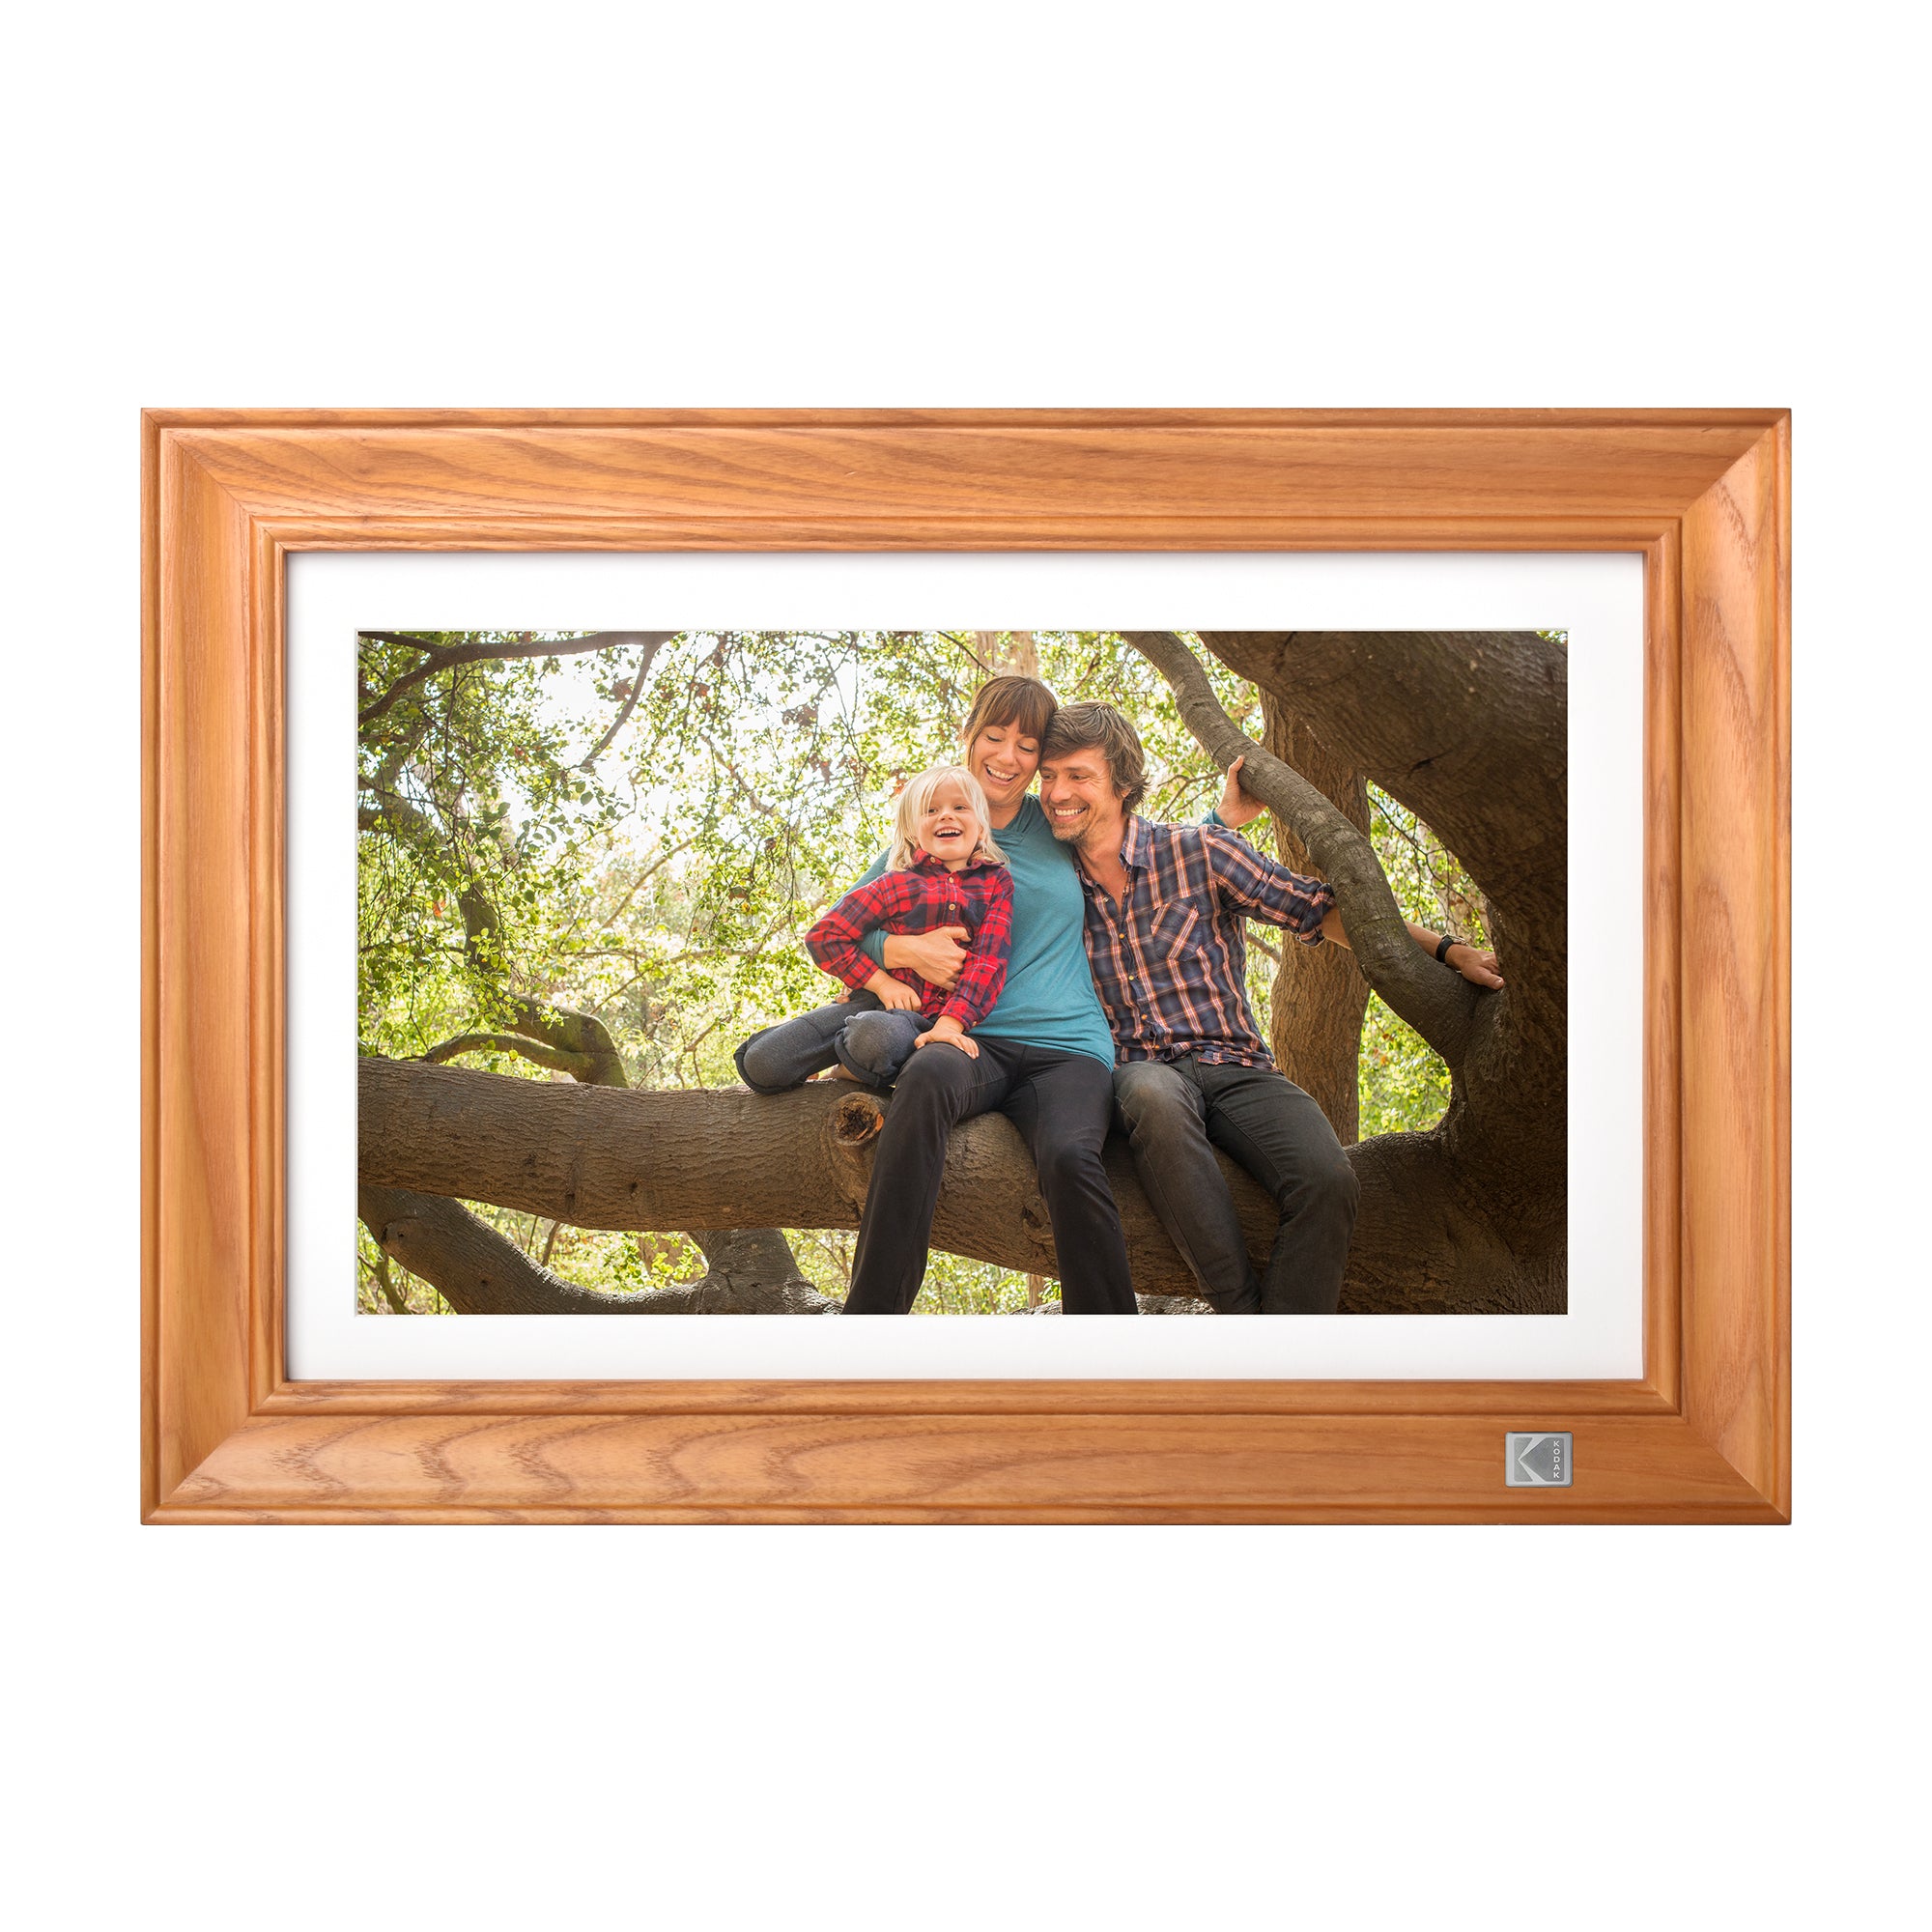 Kodak Classic 14.1 inch WiFi Enabled Digital Photo Frame with Full HD Touchscreen and 32GB Built-in Memory for Photo, Video and Audio Play (Burlywood)